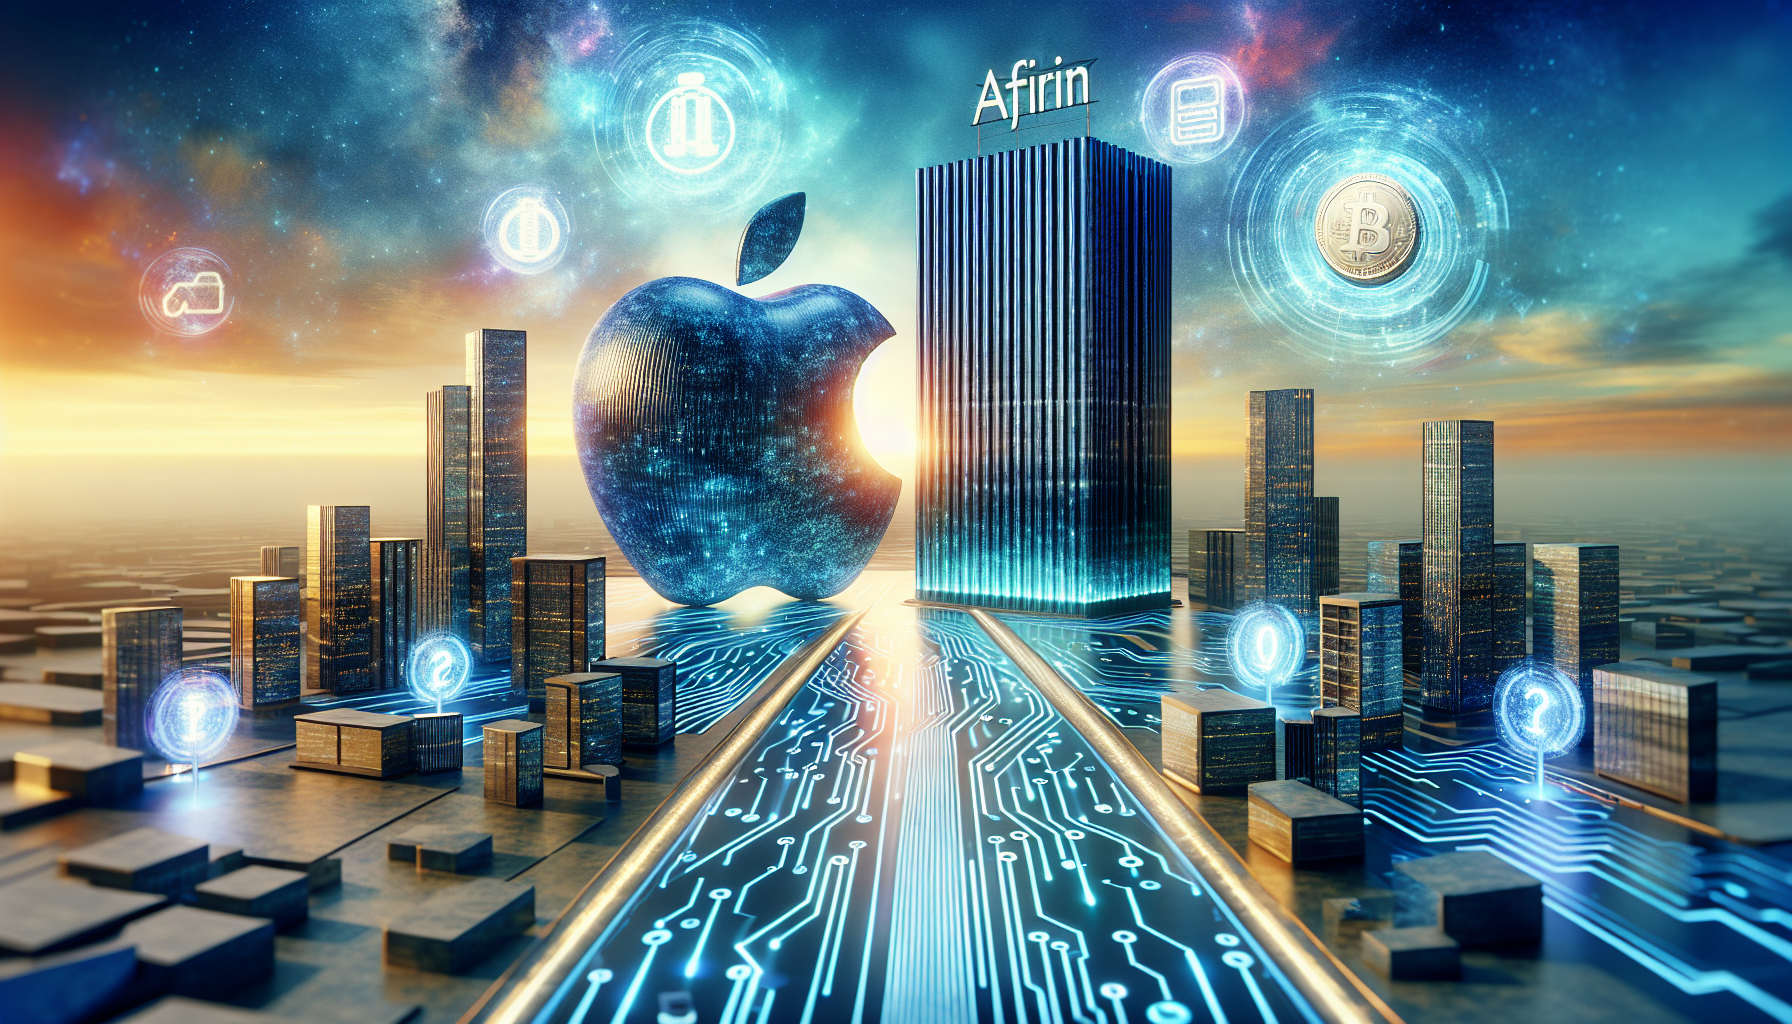 Apple's partnership with Affirm is revolutionizing digital payments and the future of finance.